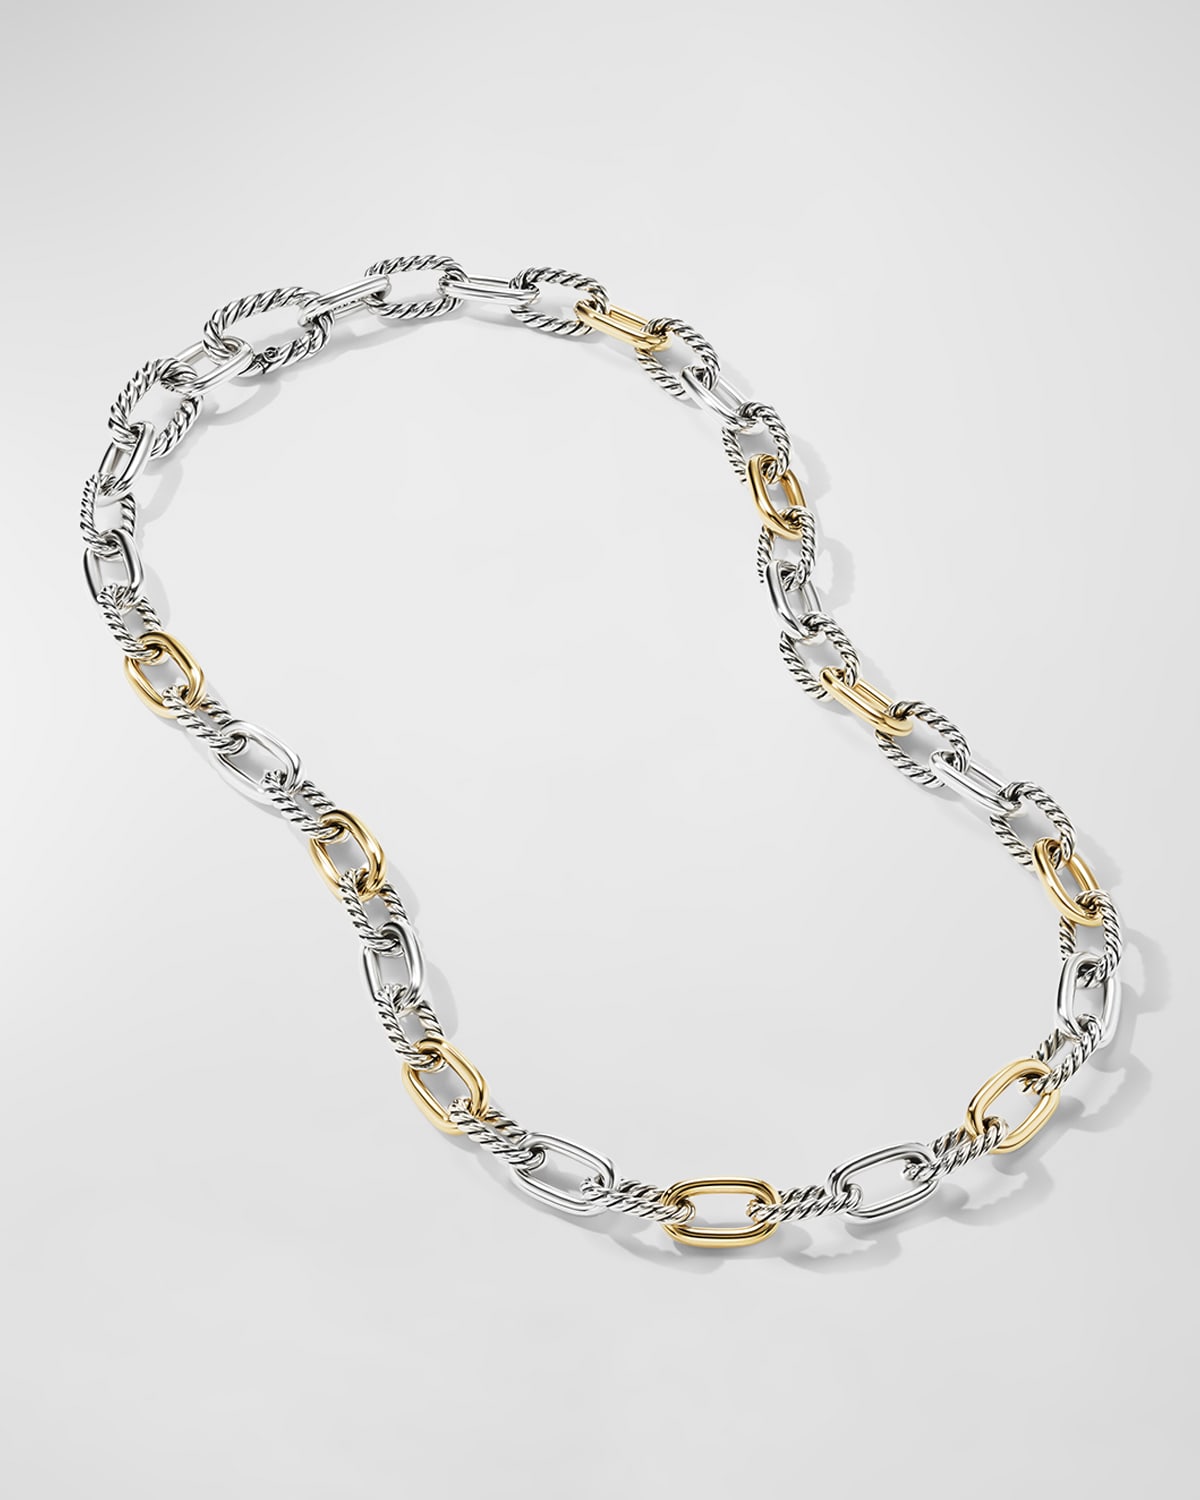 David Yurman Madison Chain Necklace in Silver and 18K Gold, 8.5mm, 20"L